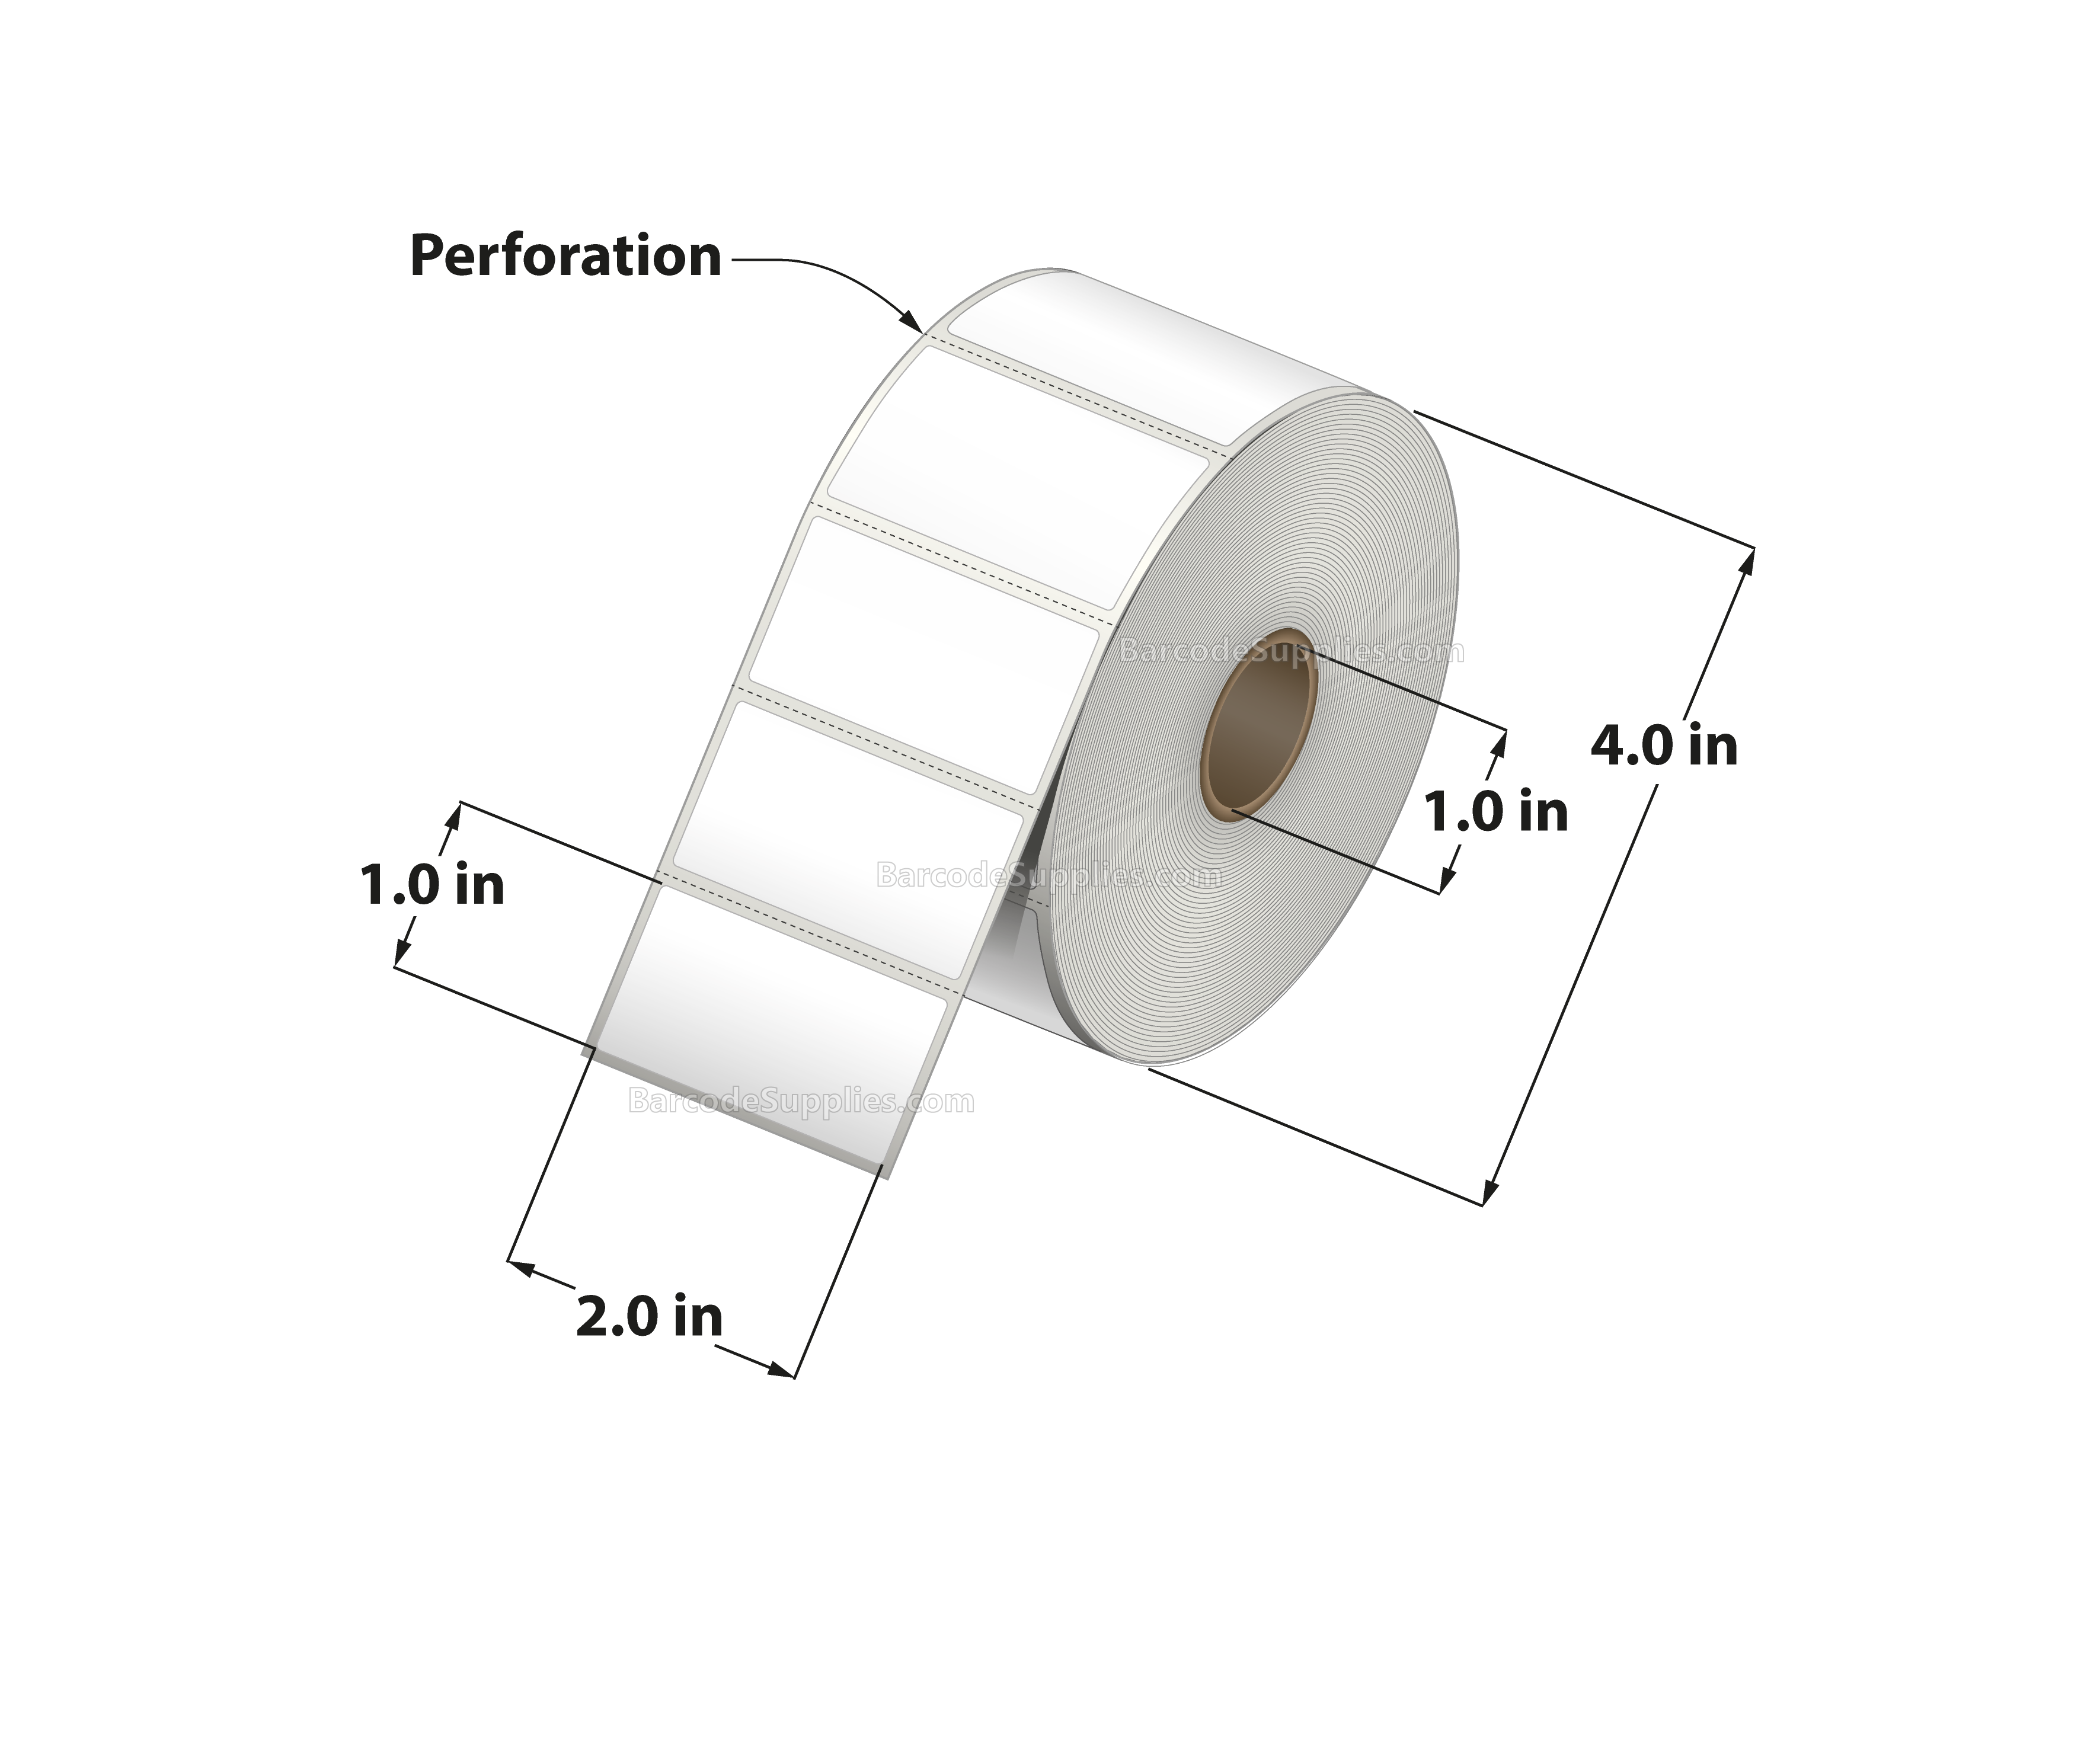 2 x 1 Direct Thermal White Labels With Acrylic Adhesive - Perforated - 1375 Labels Per Roll - Carton Of 12 Rolls - 16500 Labels Total - MPN: RD-2-1-1375-1 - BarcodeSource, Inc.